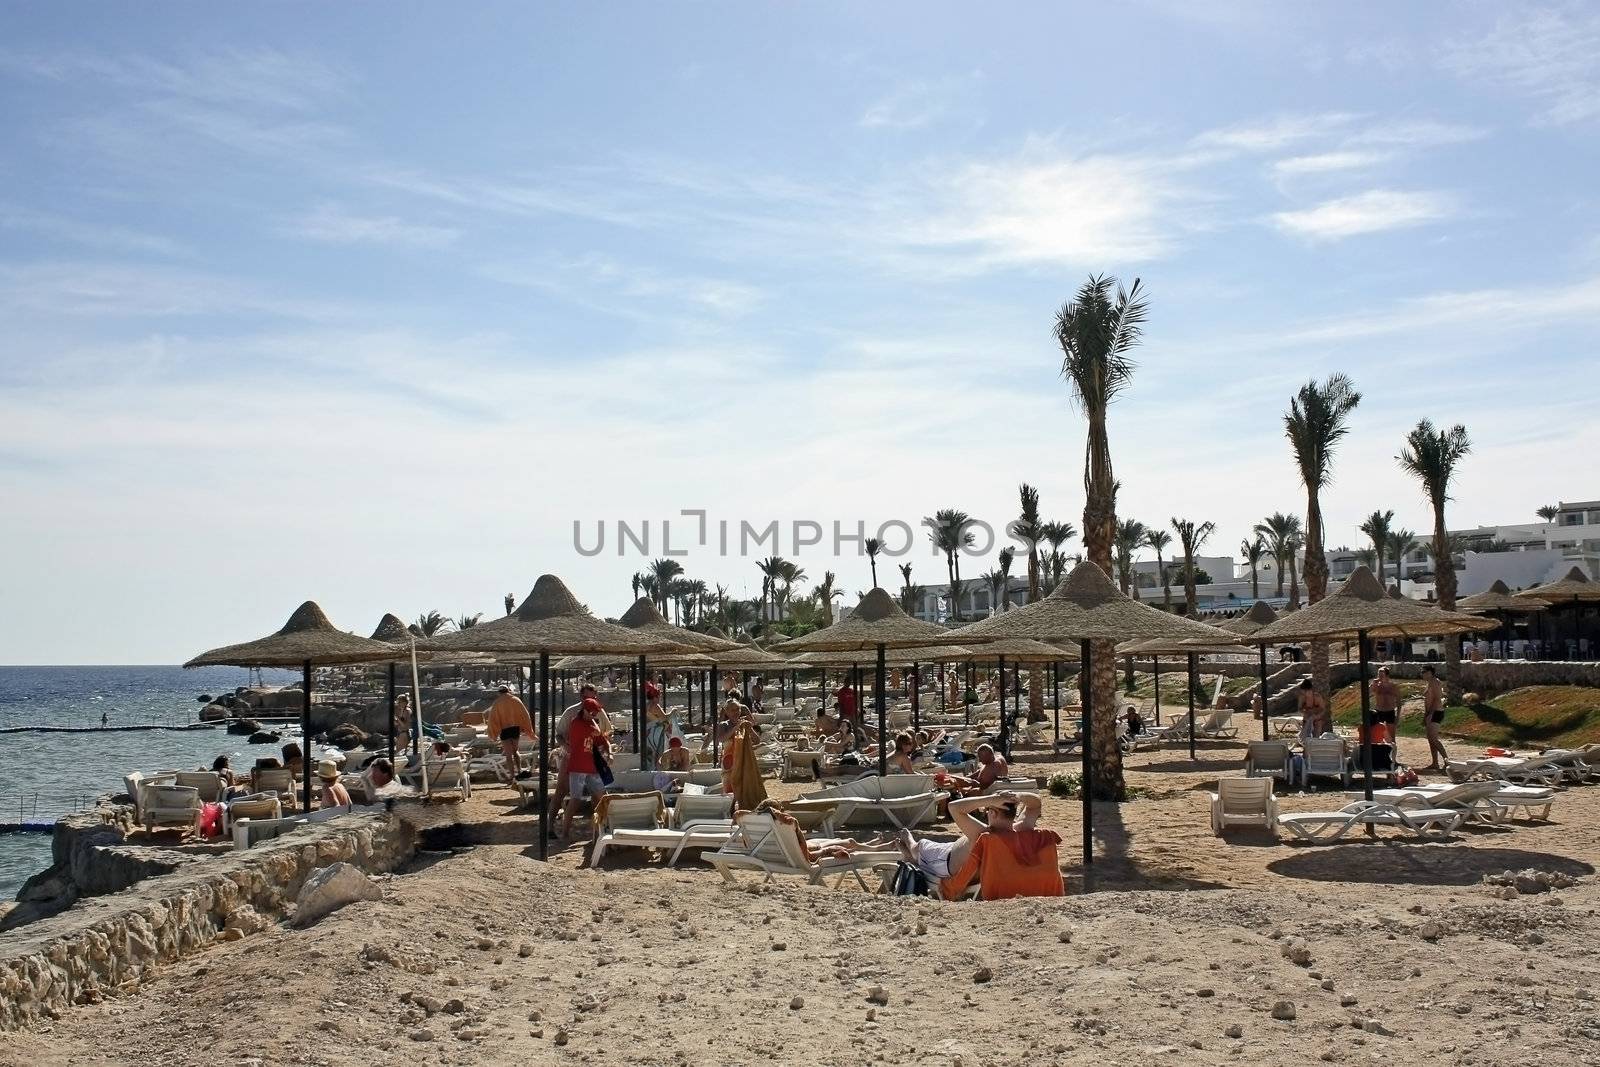 Egypt, on a beach people sunbathe. In the blue sky - small clouds.